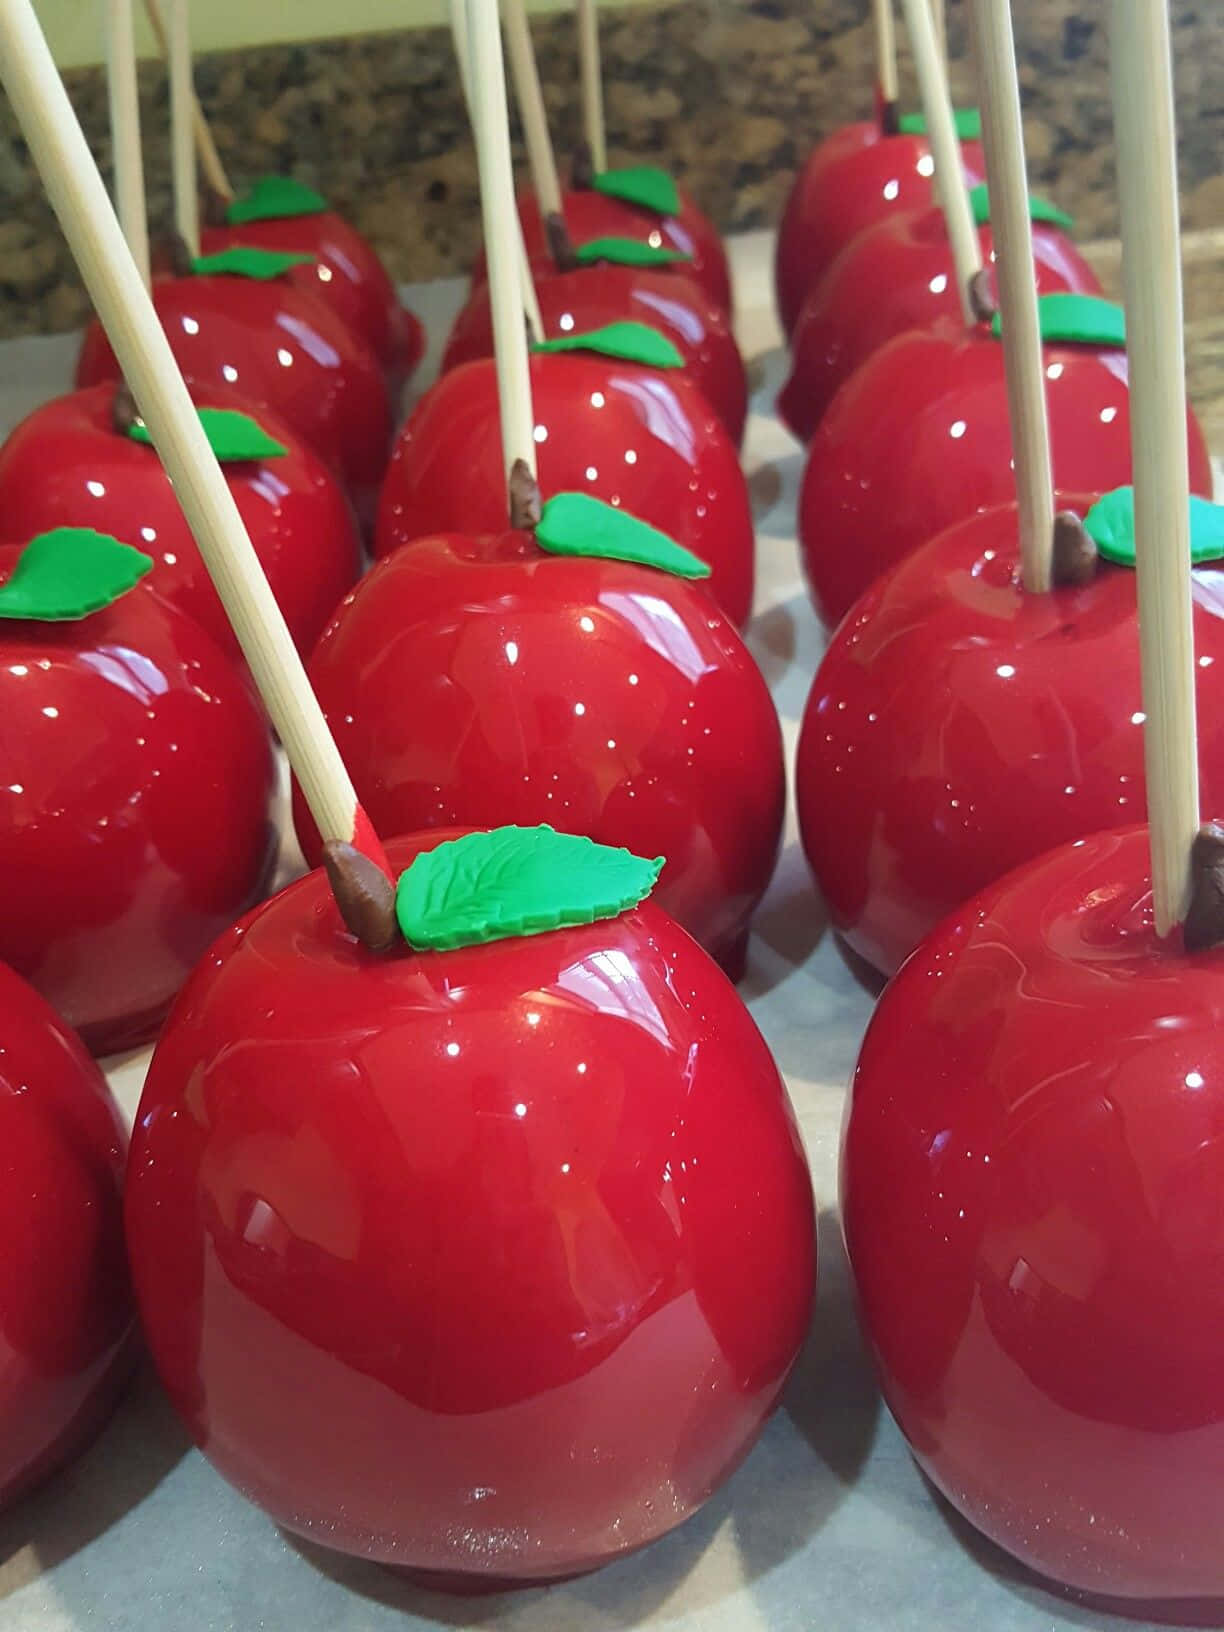 Vibrant and Delicious Candy Apples Wallpaper